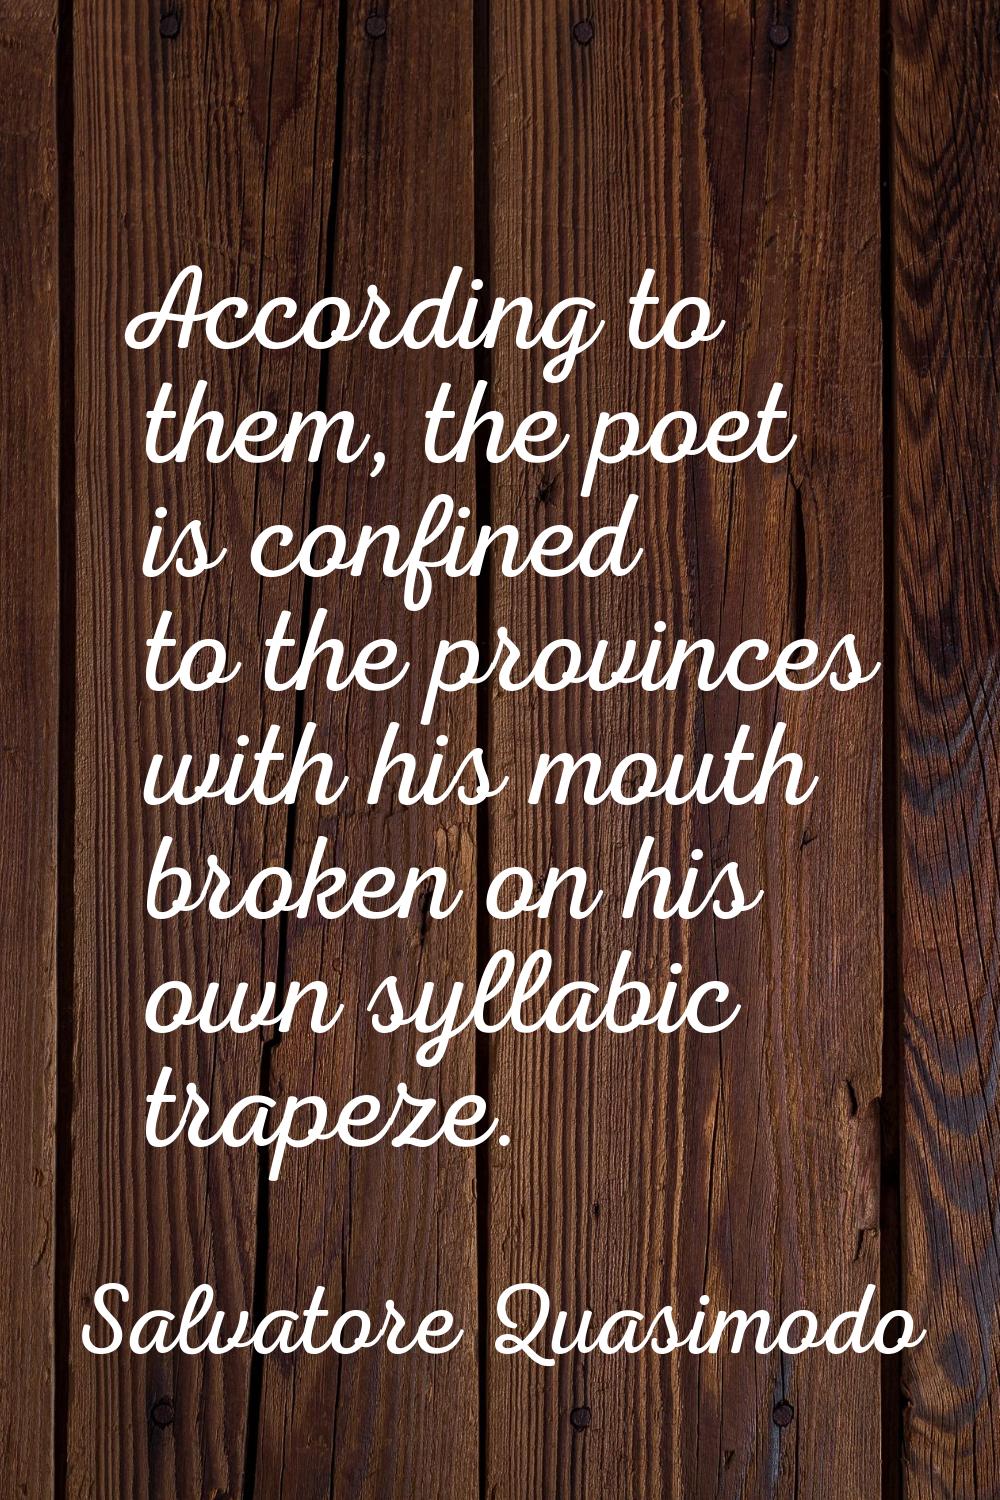 According to them, the poet is confined to the provinces with his mouth broken on his own syllabic 